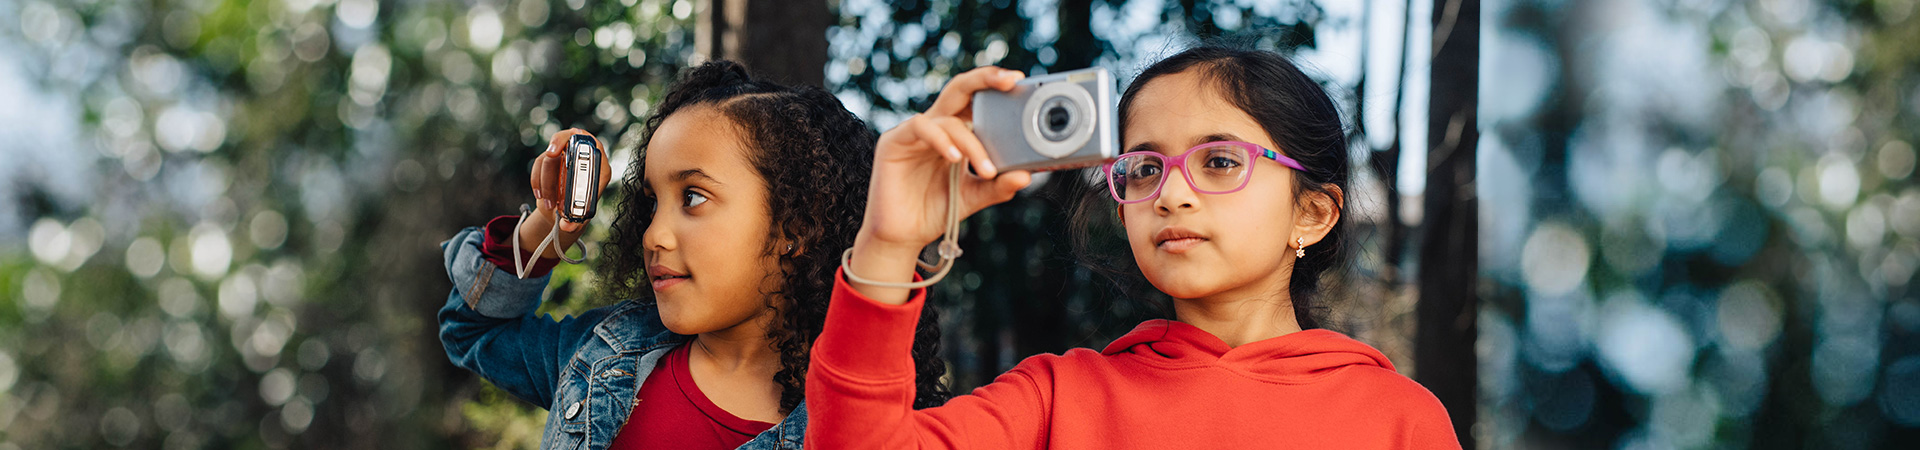  two girl scouts looking through digital cameras 